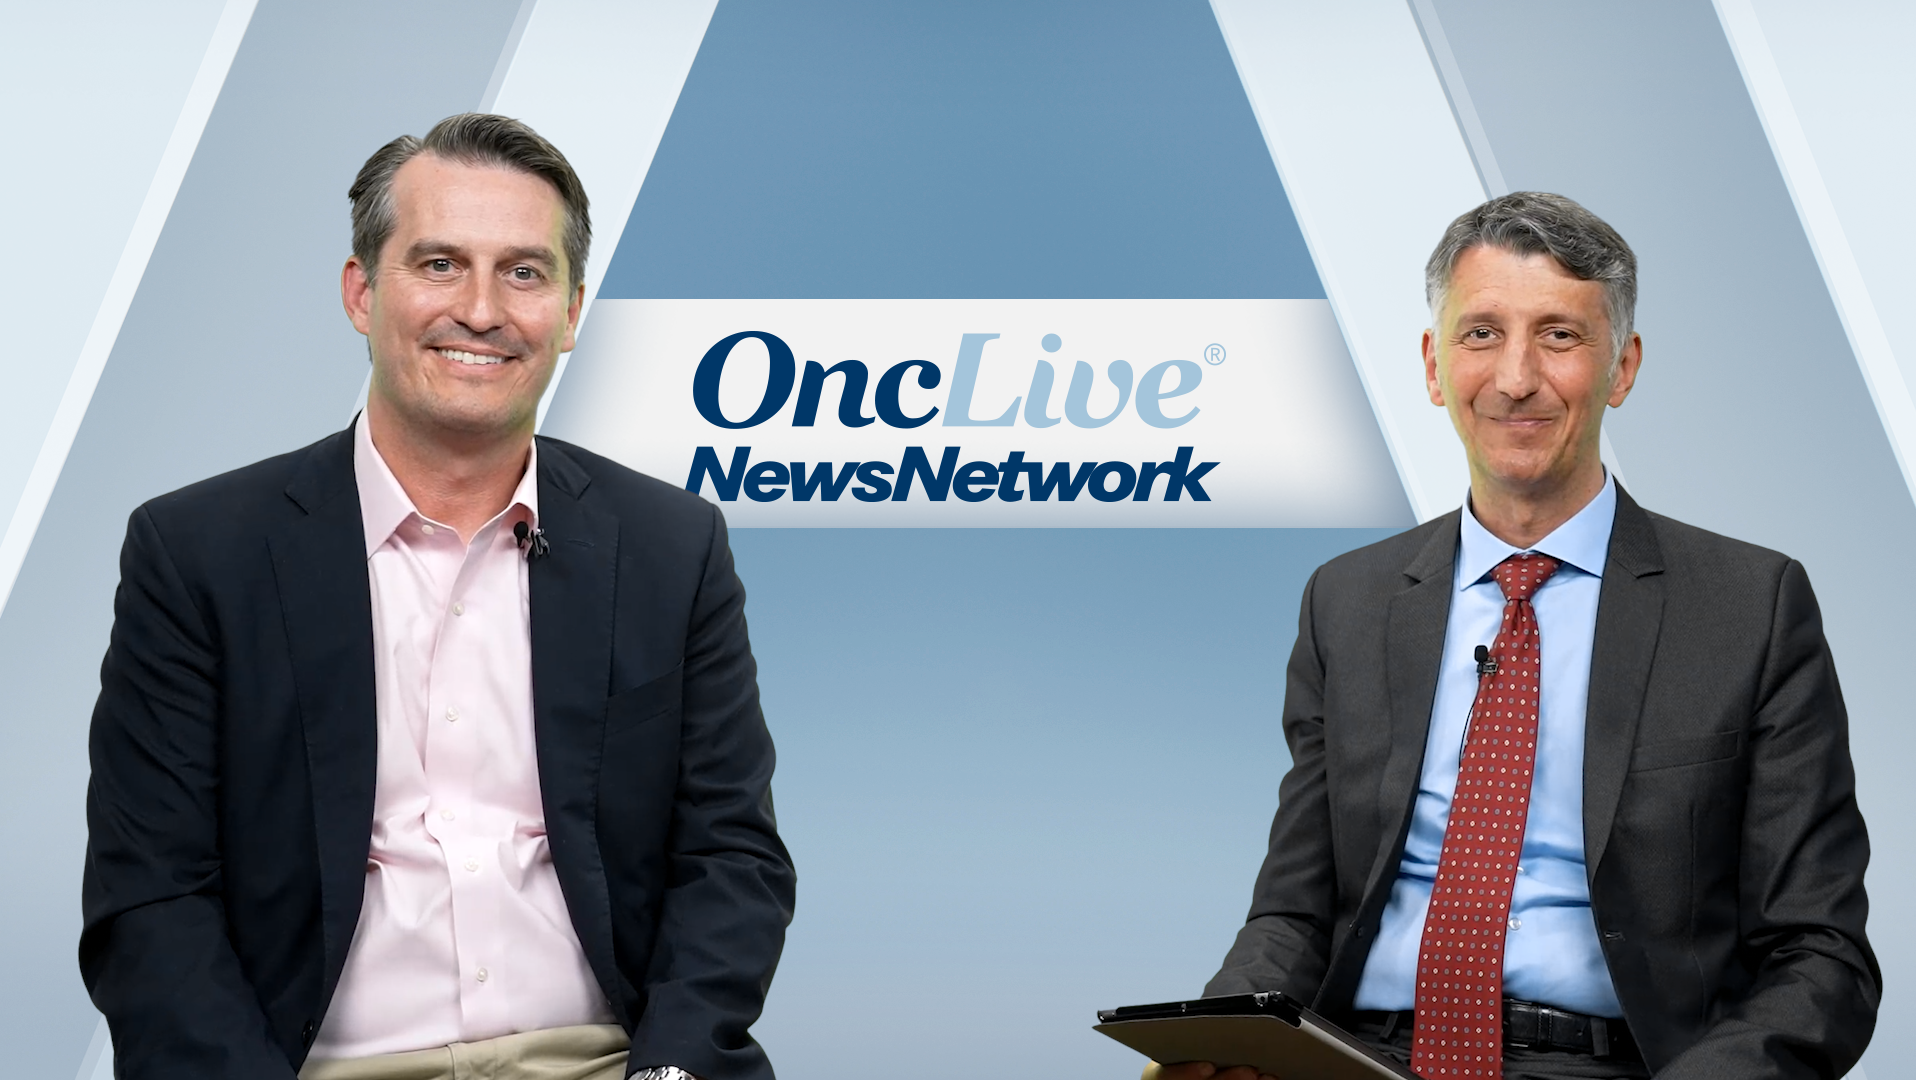 Treatment Options for Patients with CLL Progressing on Covalent BTK Inhibitors